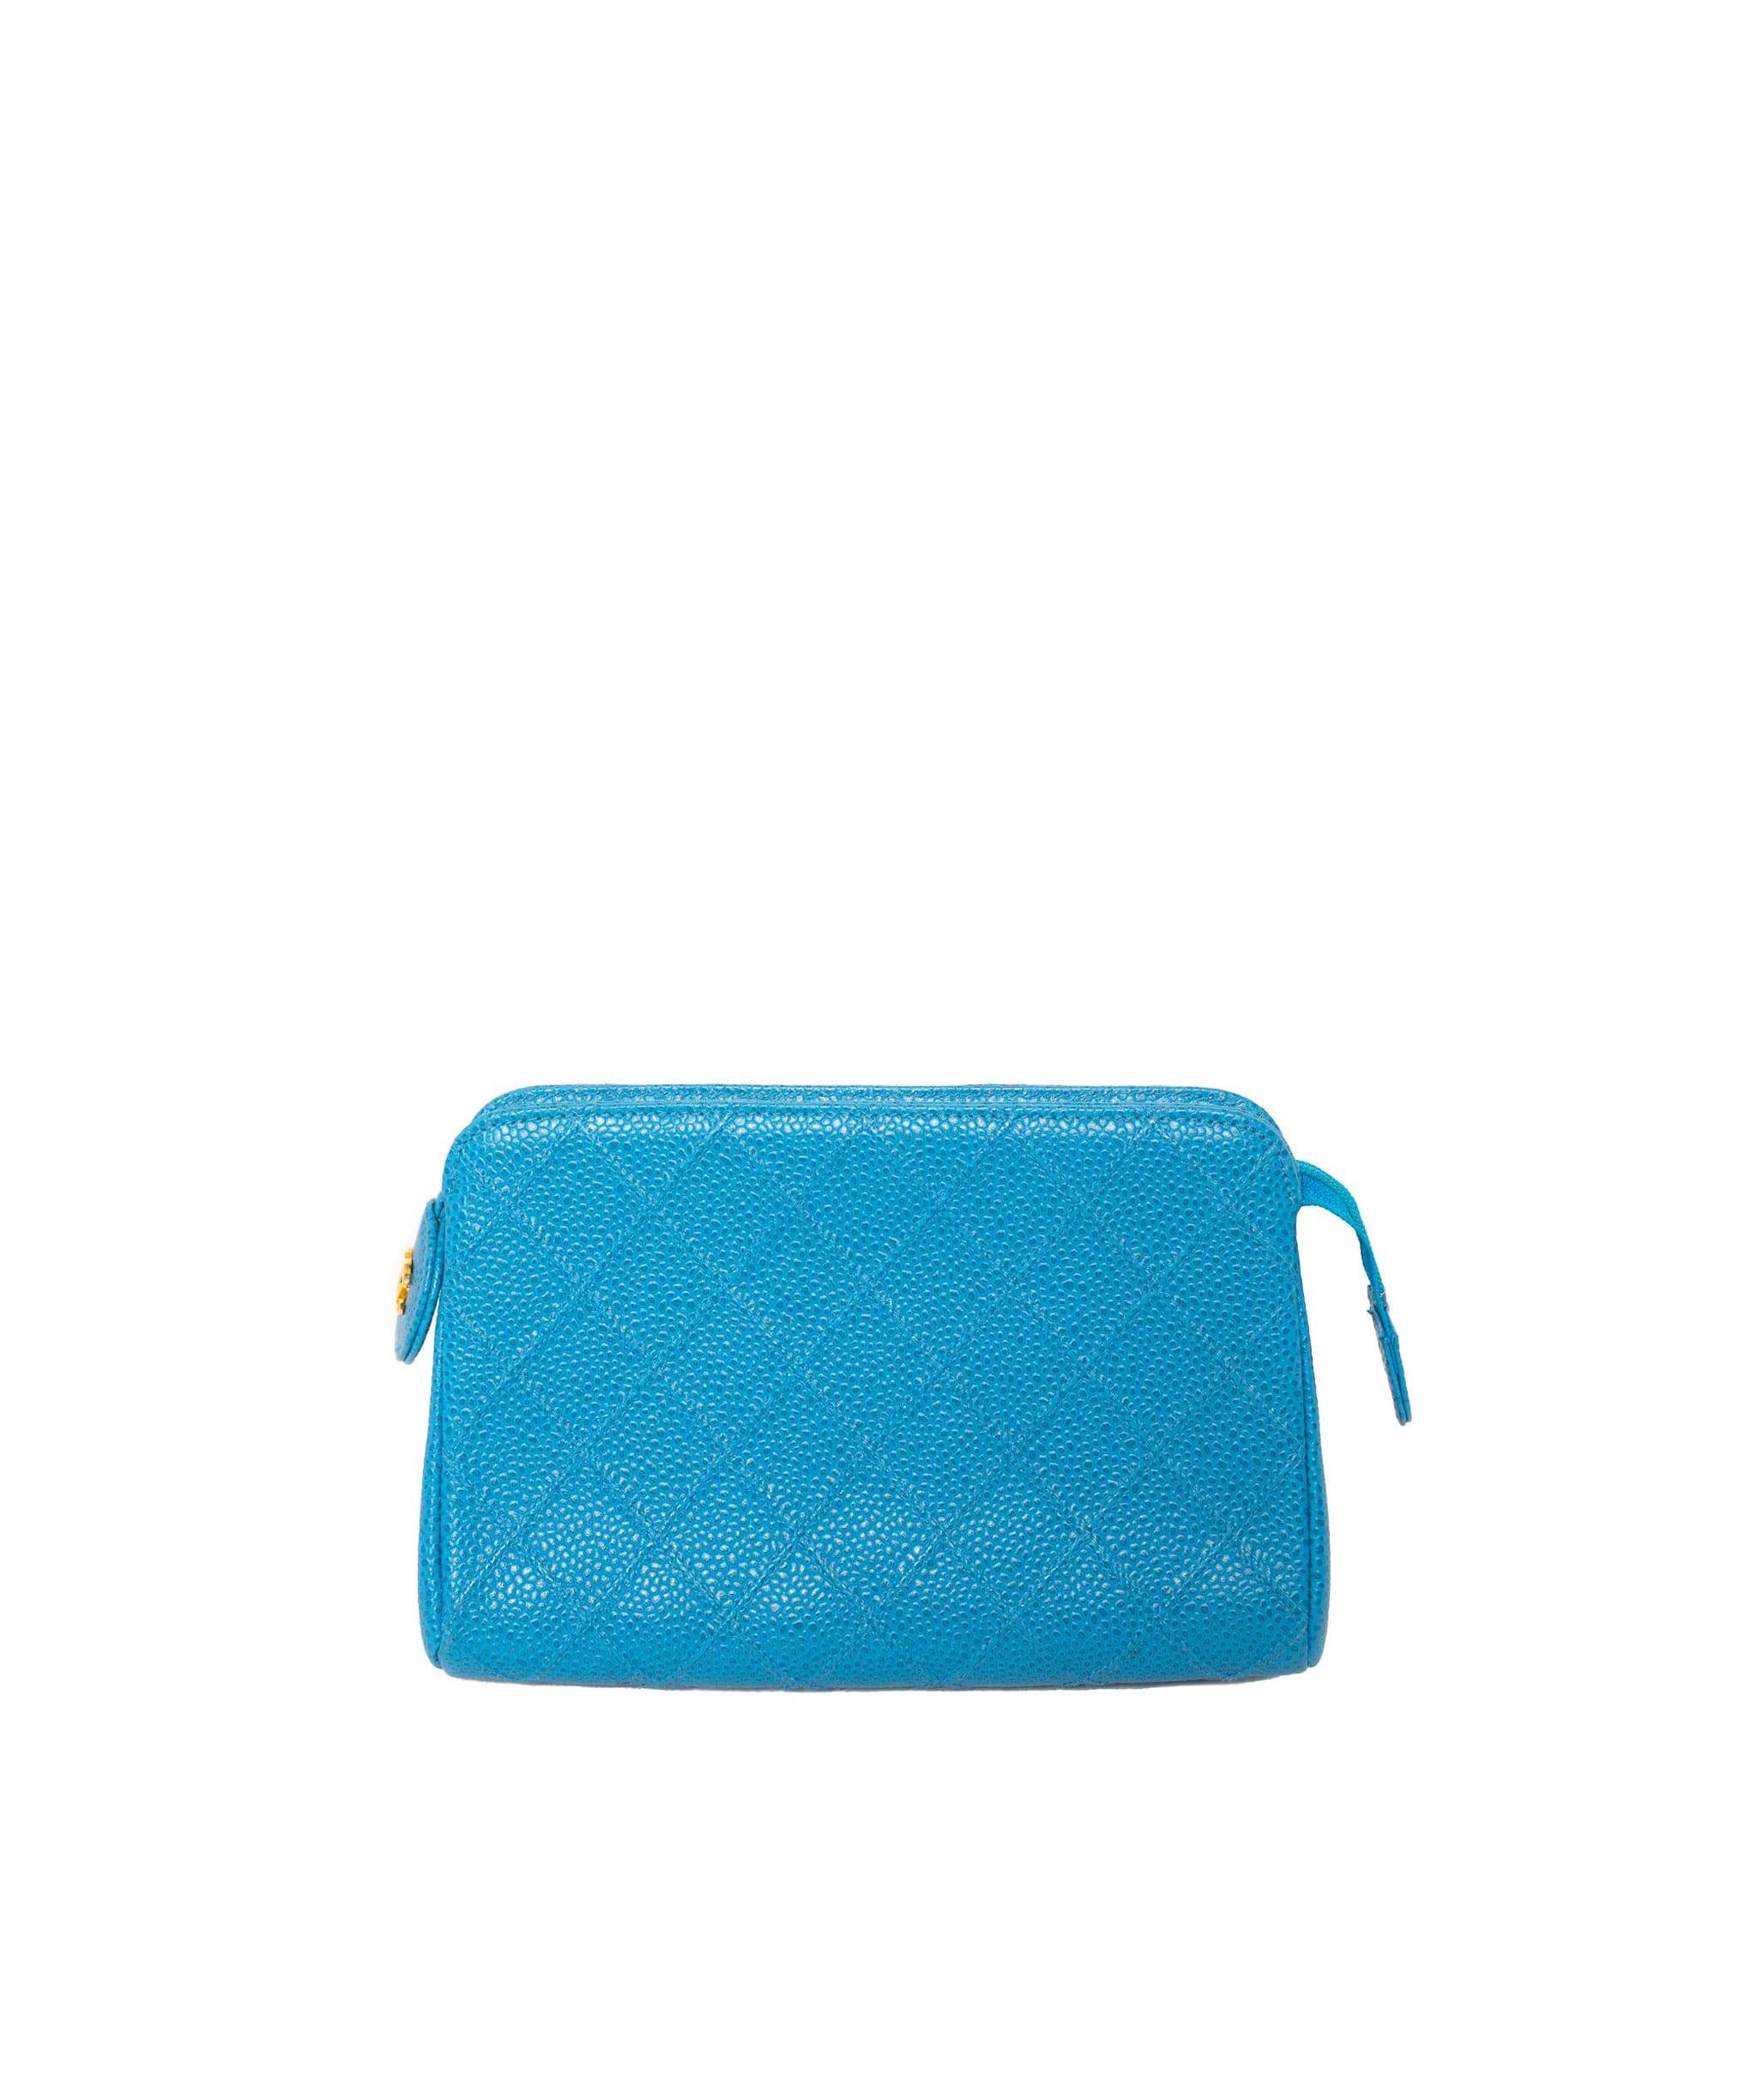 Chanel Chanel blue caviarskin makeup pouch - AWL1173